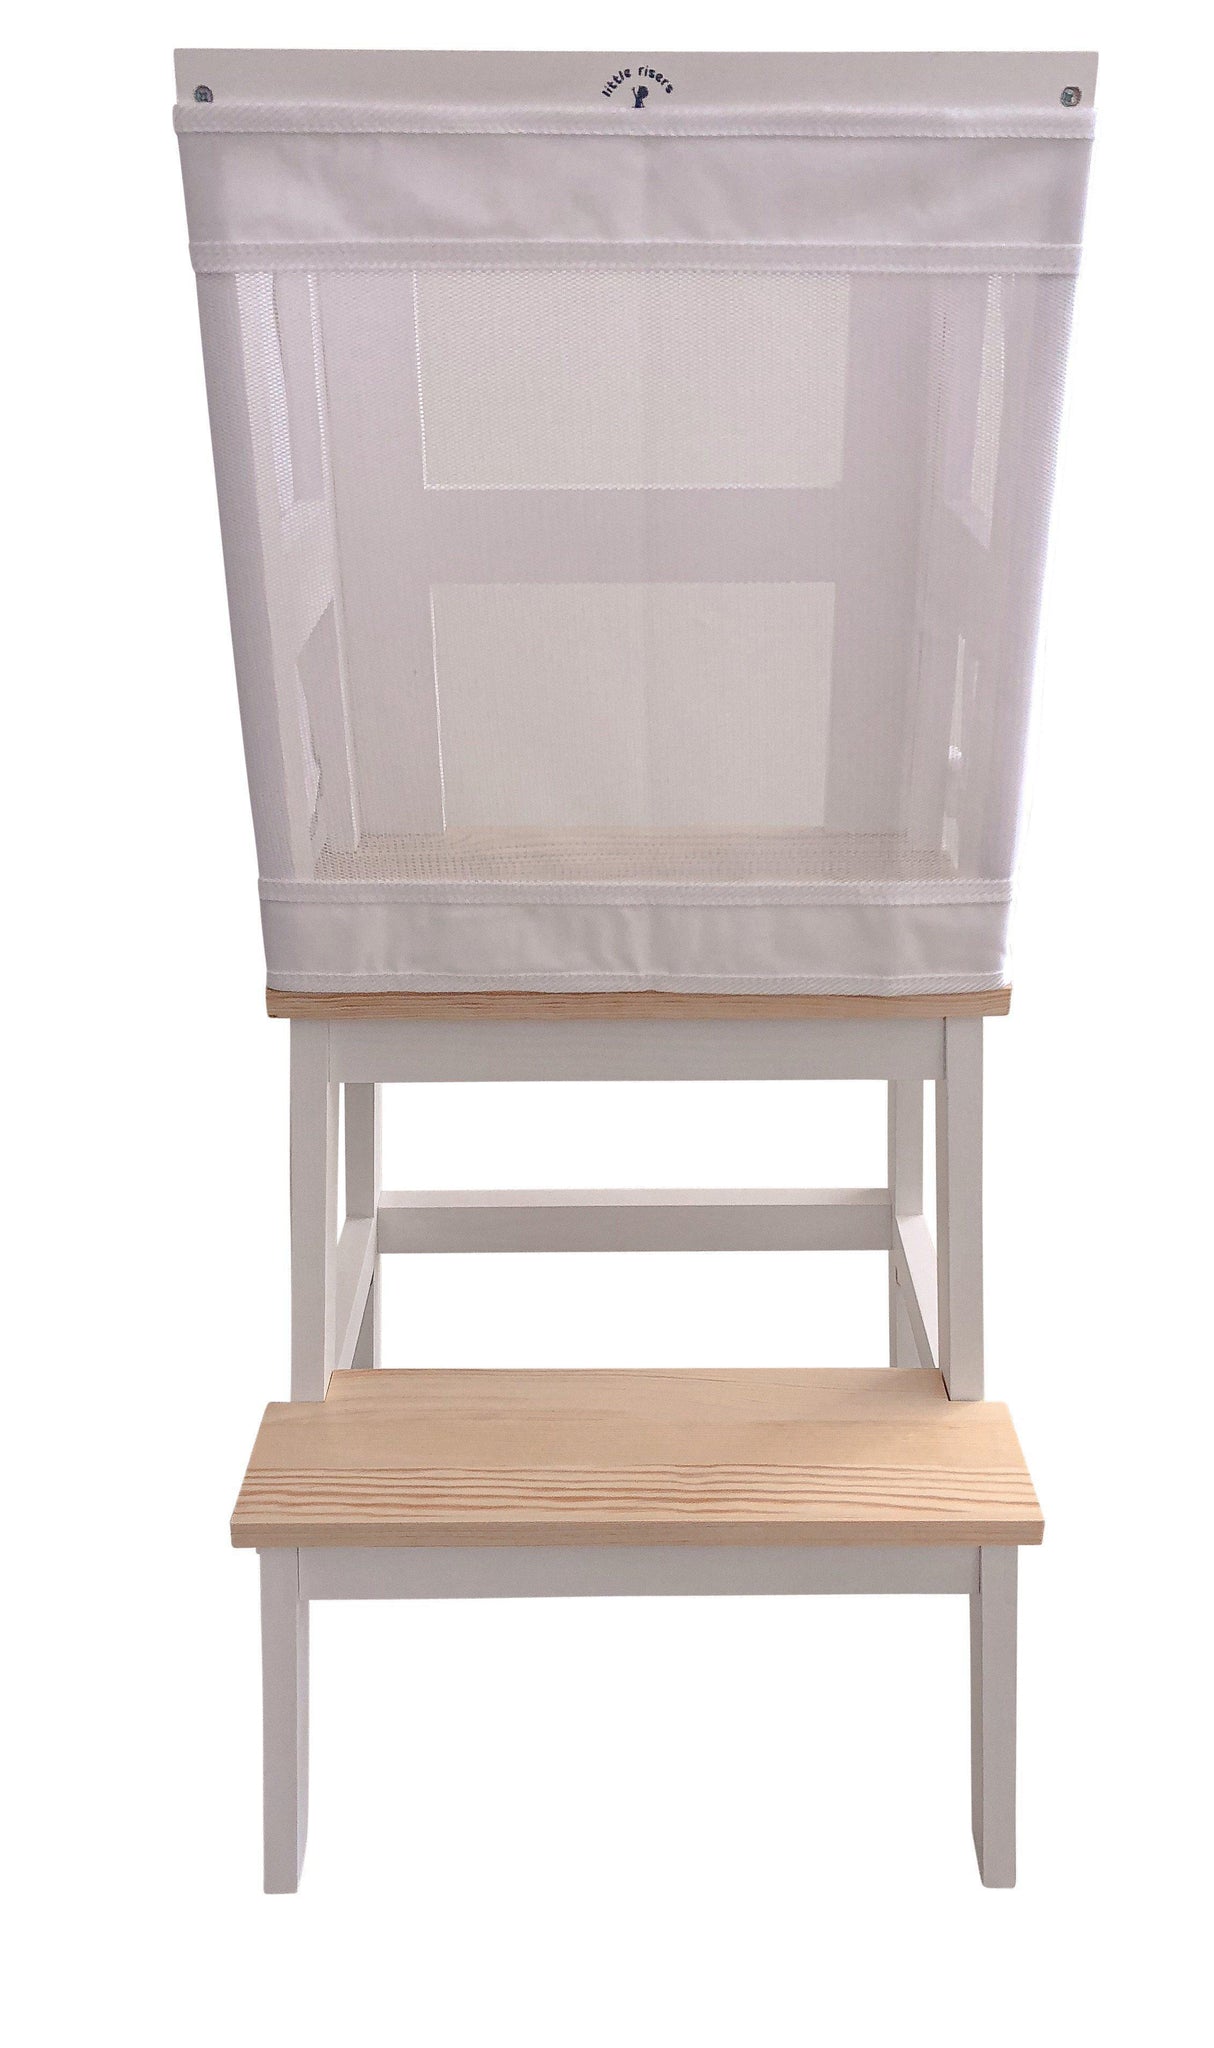 Toddler Tower Safety Guard-Little Risers